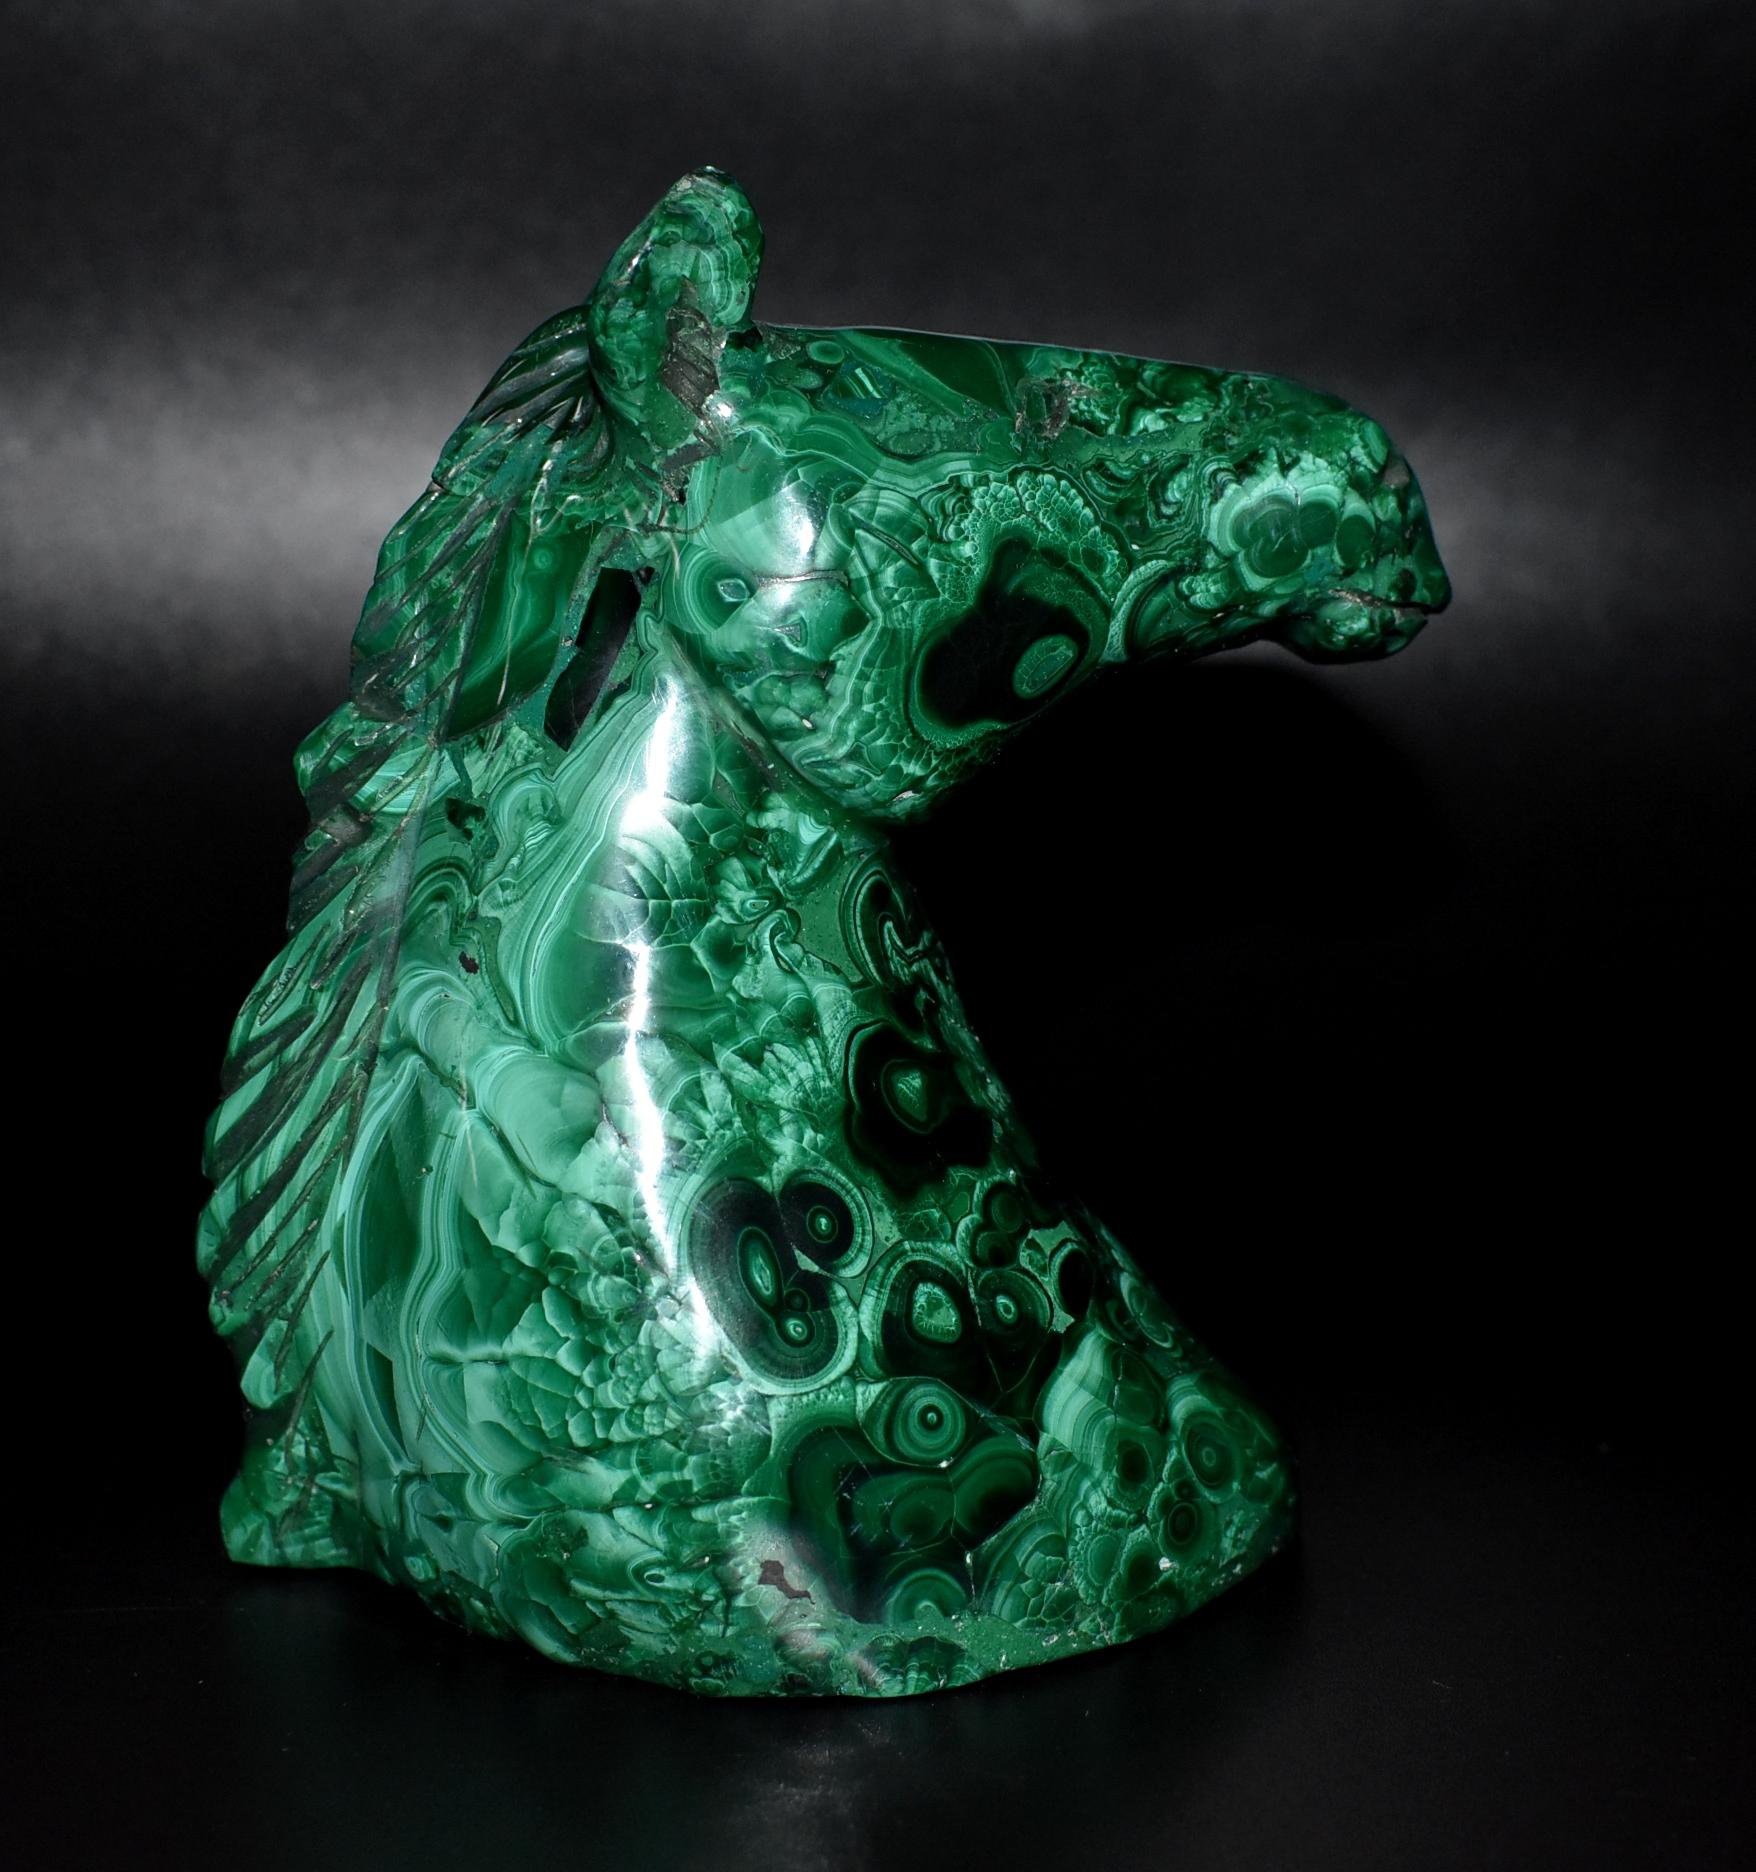 A wonderful 1.8 lb horse bust sculpture in spectacular natural malachite. This exceptional piece uses carefully selected fine grade AAA gemstone malachite in brilliant green, displaying bullseyes, concentric rings and swirls. Horse is finely crafted